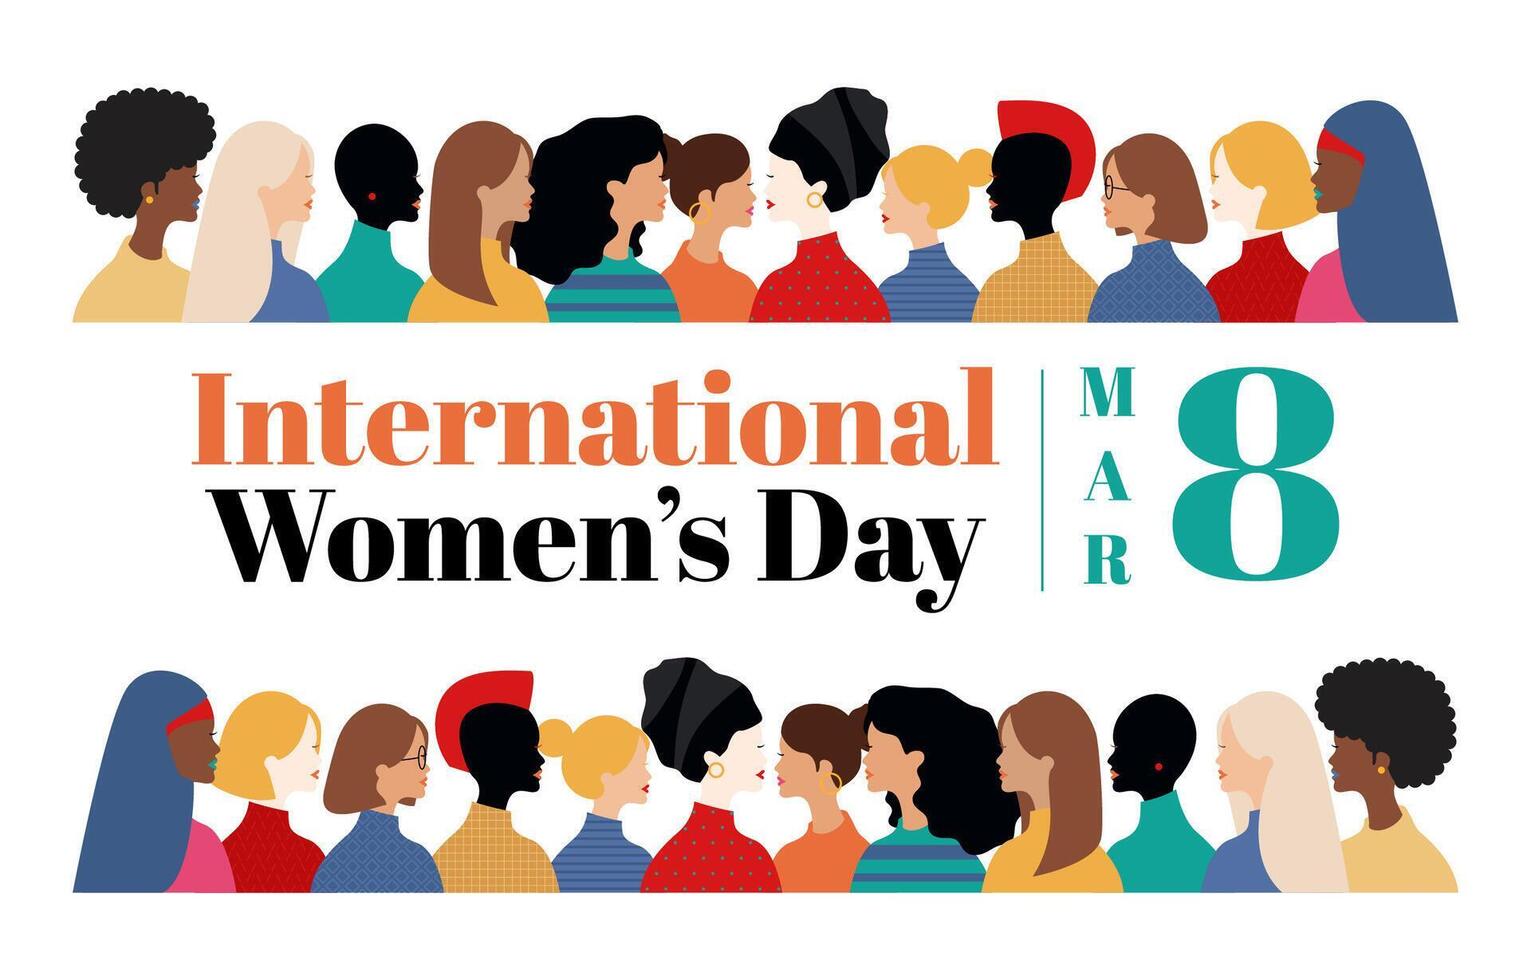 march 8  international women's day background with flat vector illustration concept